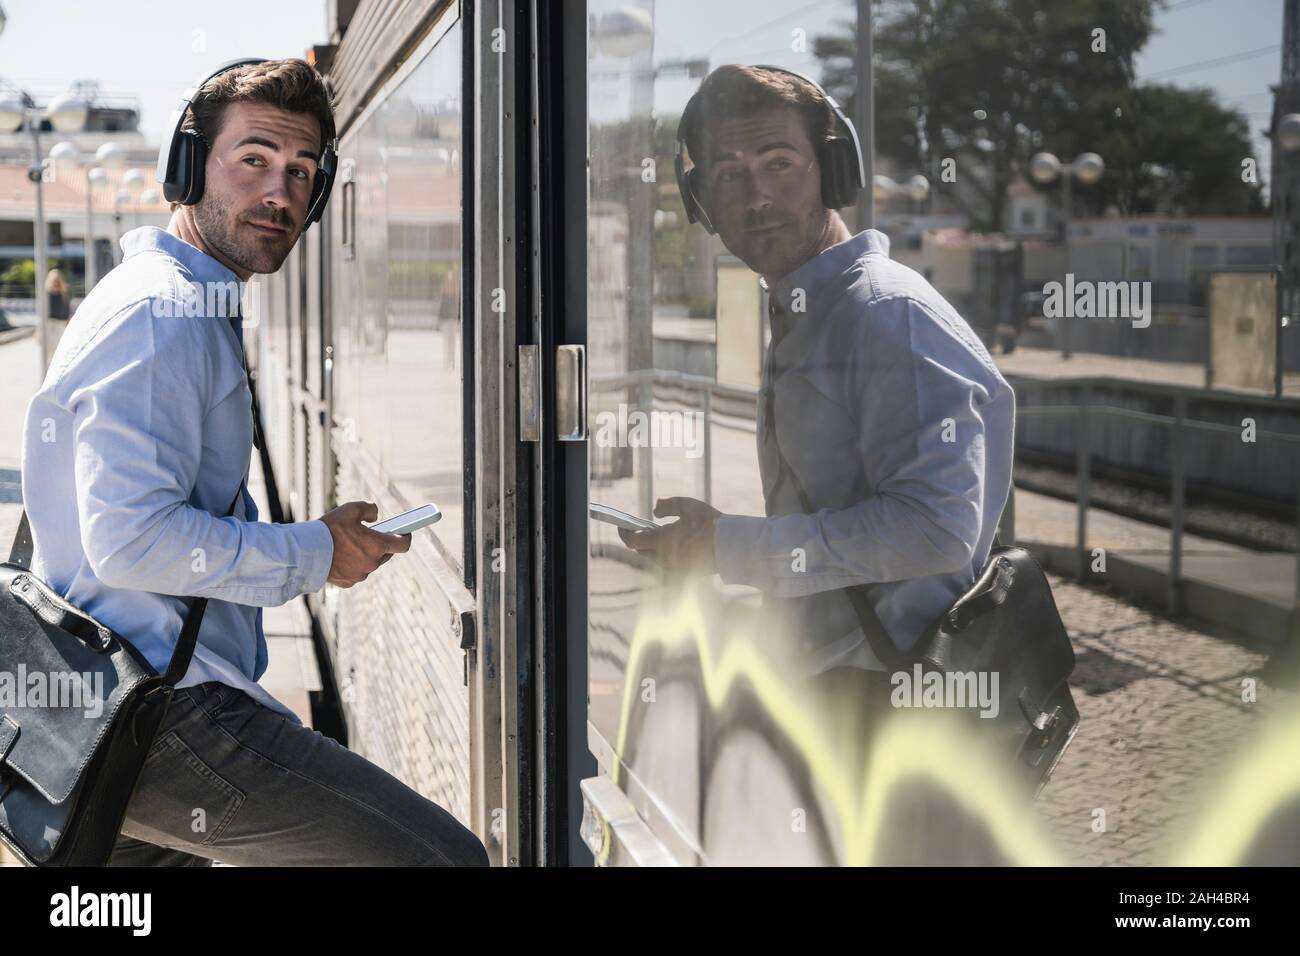 Young man with headphones and smartphone entering a train Stock Photo